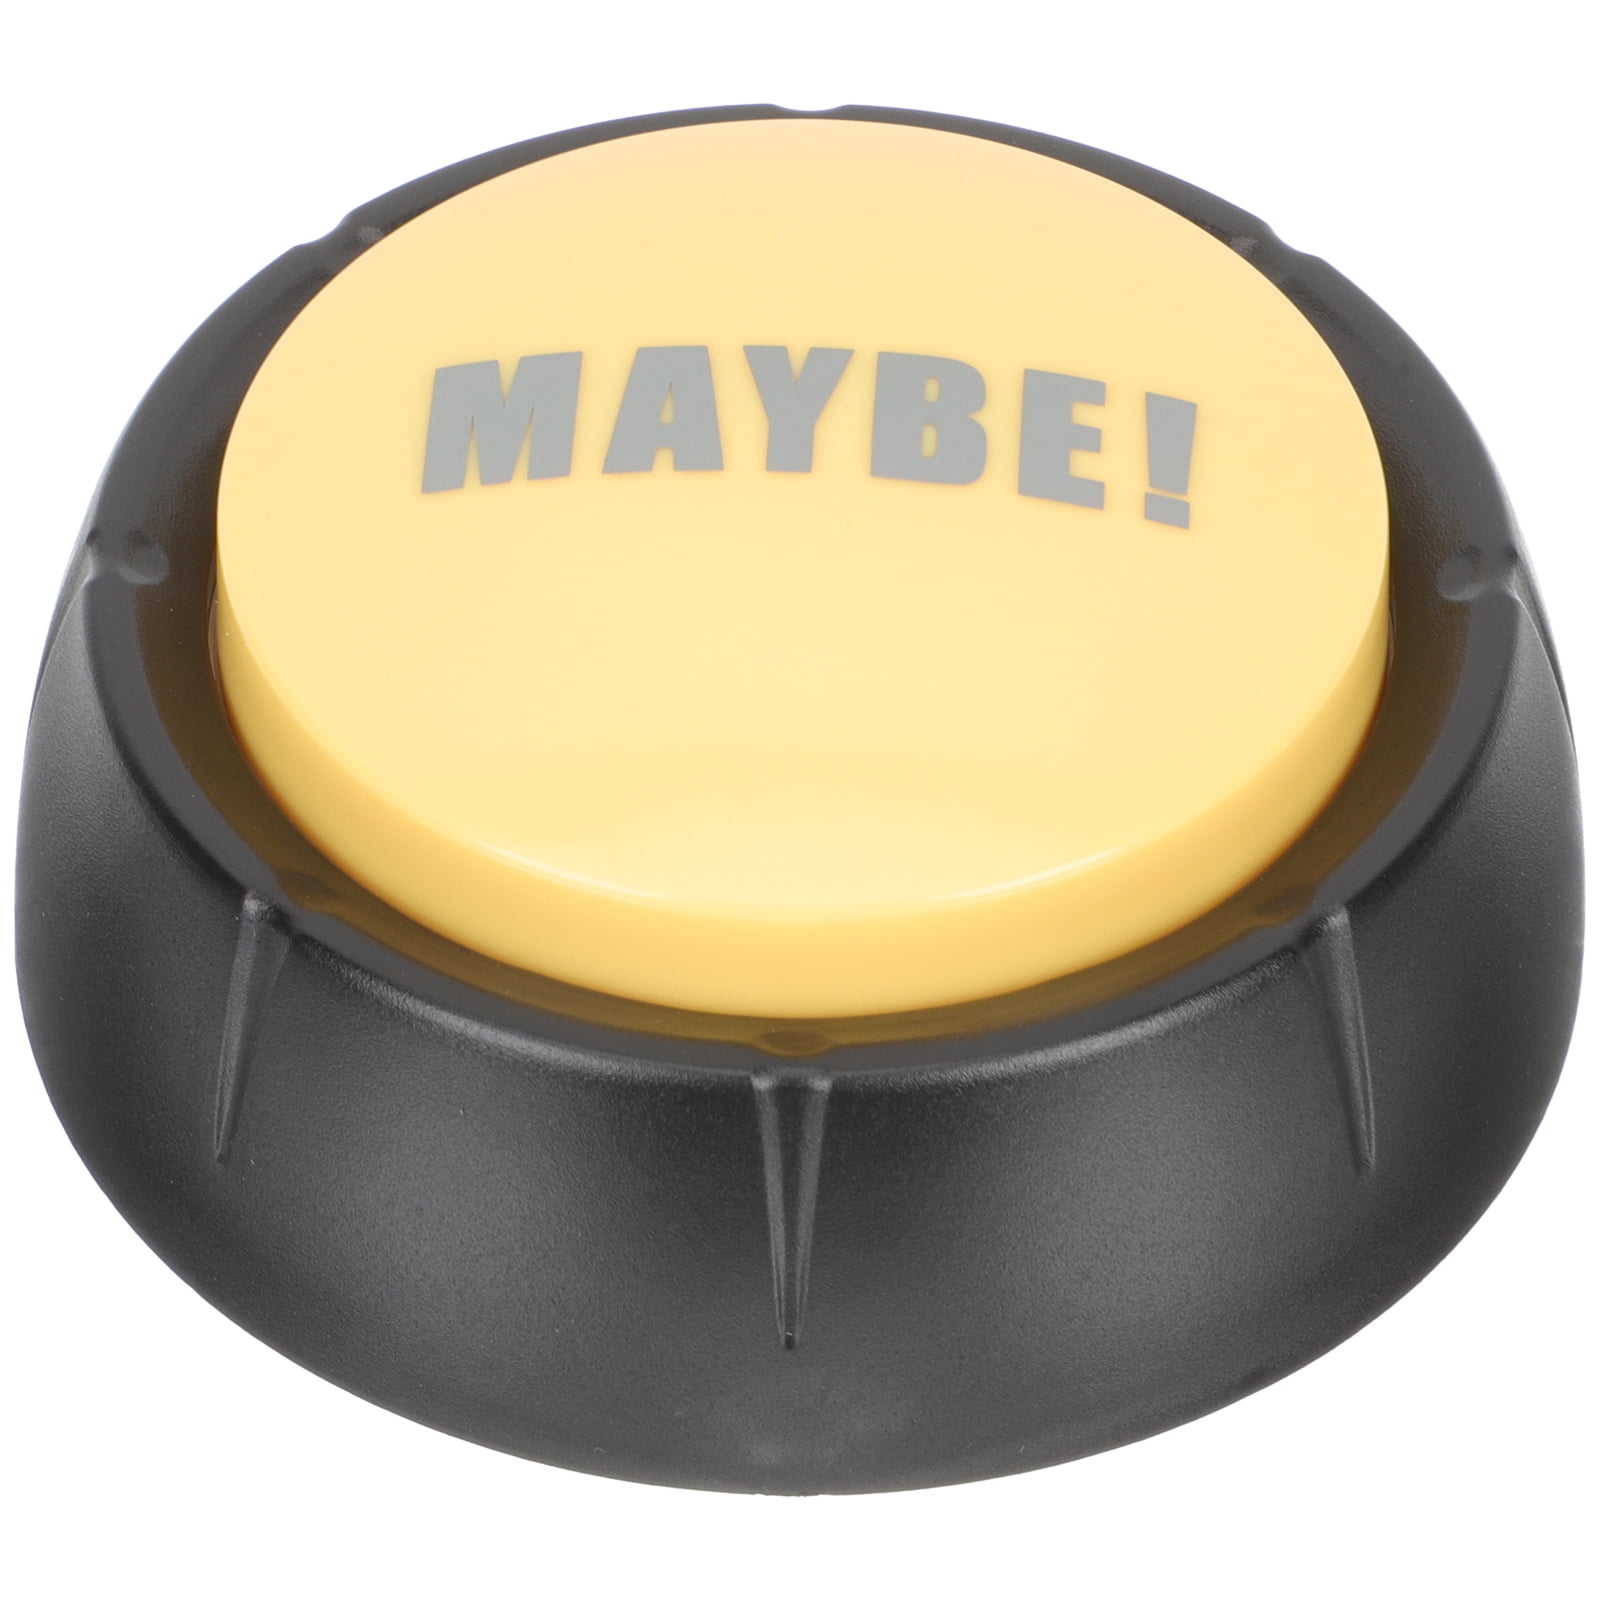 Funny NO Button - Yes Maybe or Sorry Button - QUANTITY DISCOUNTS - FREE GIFT